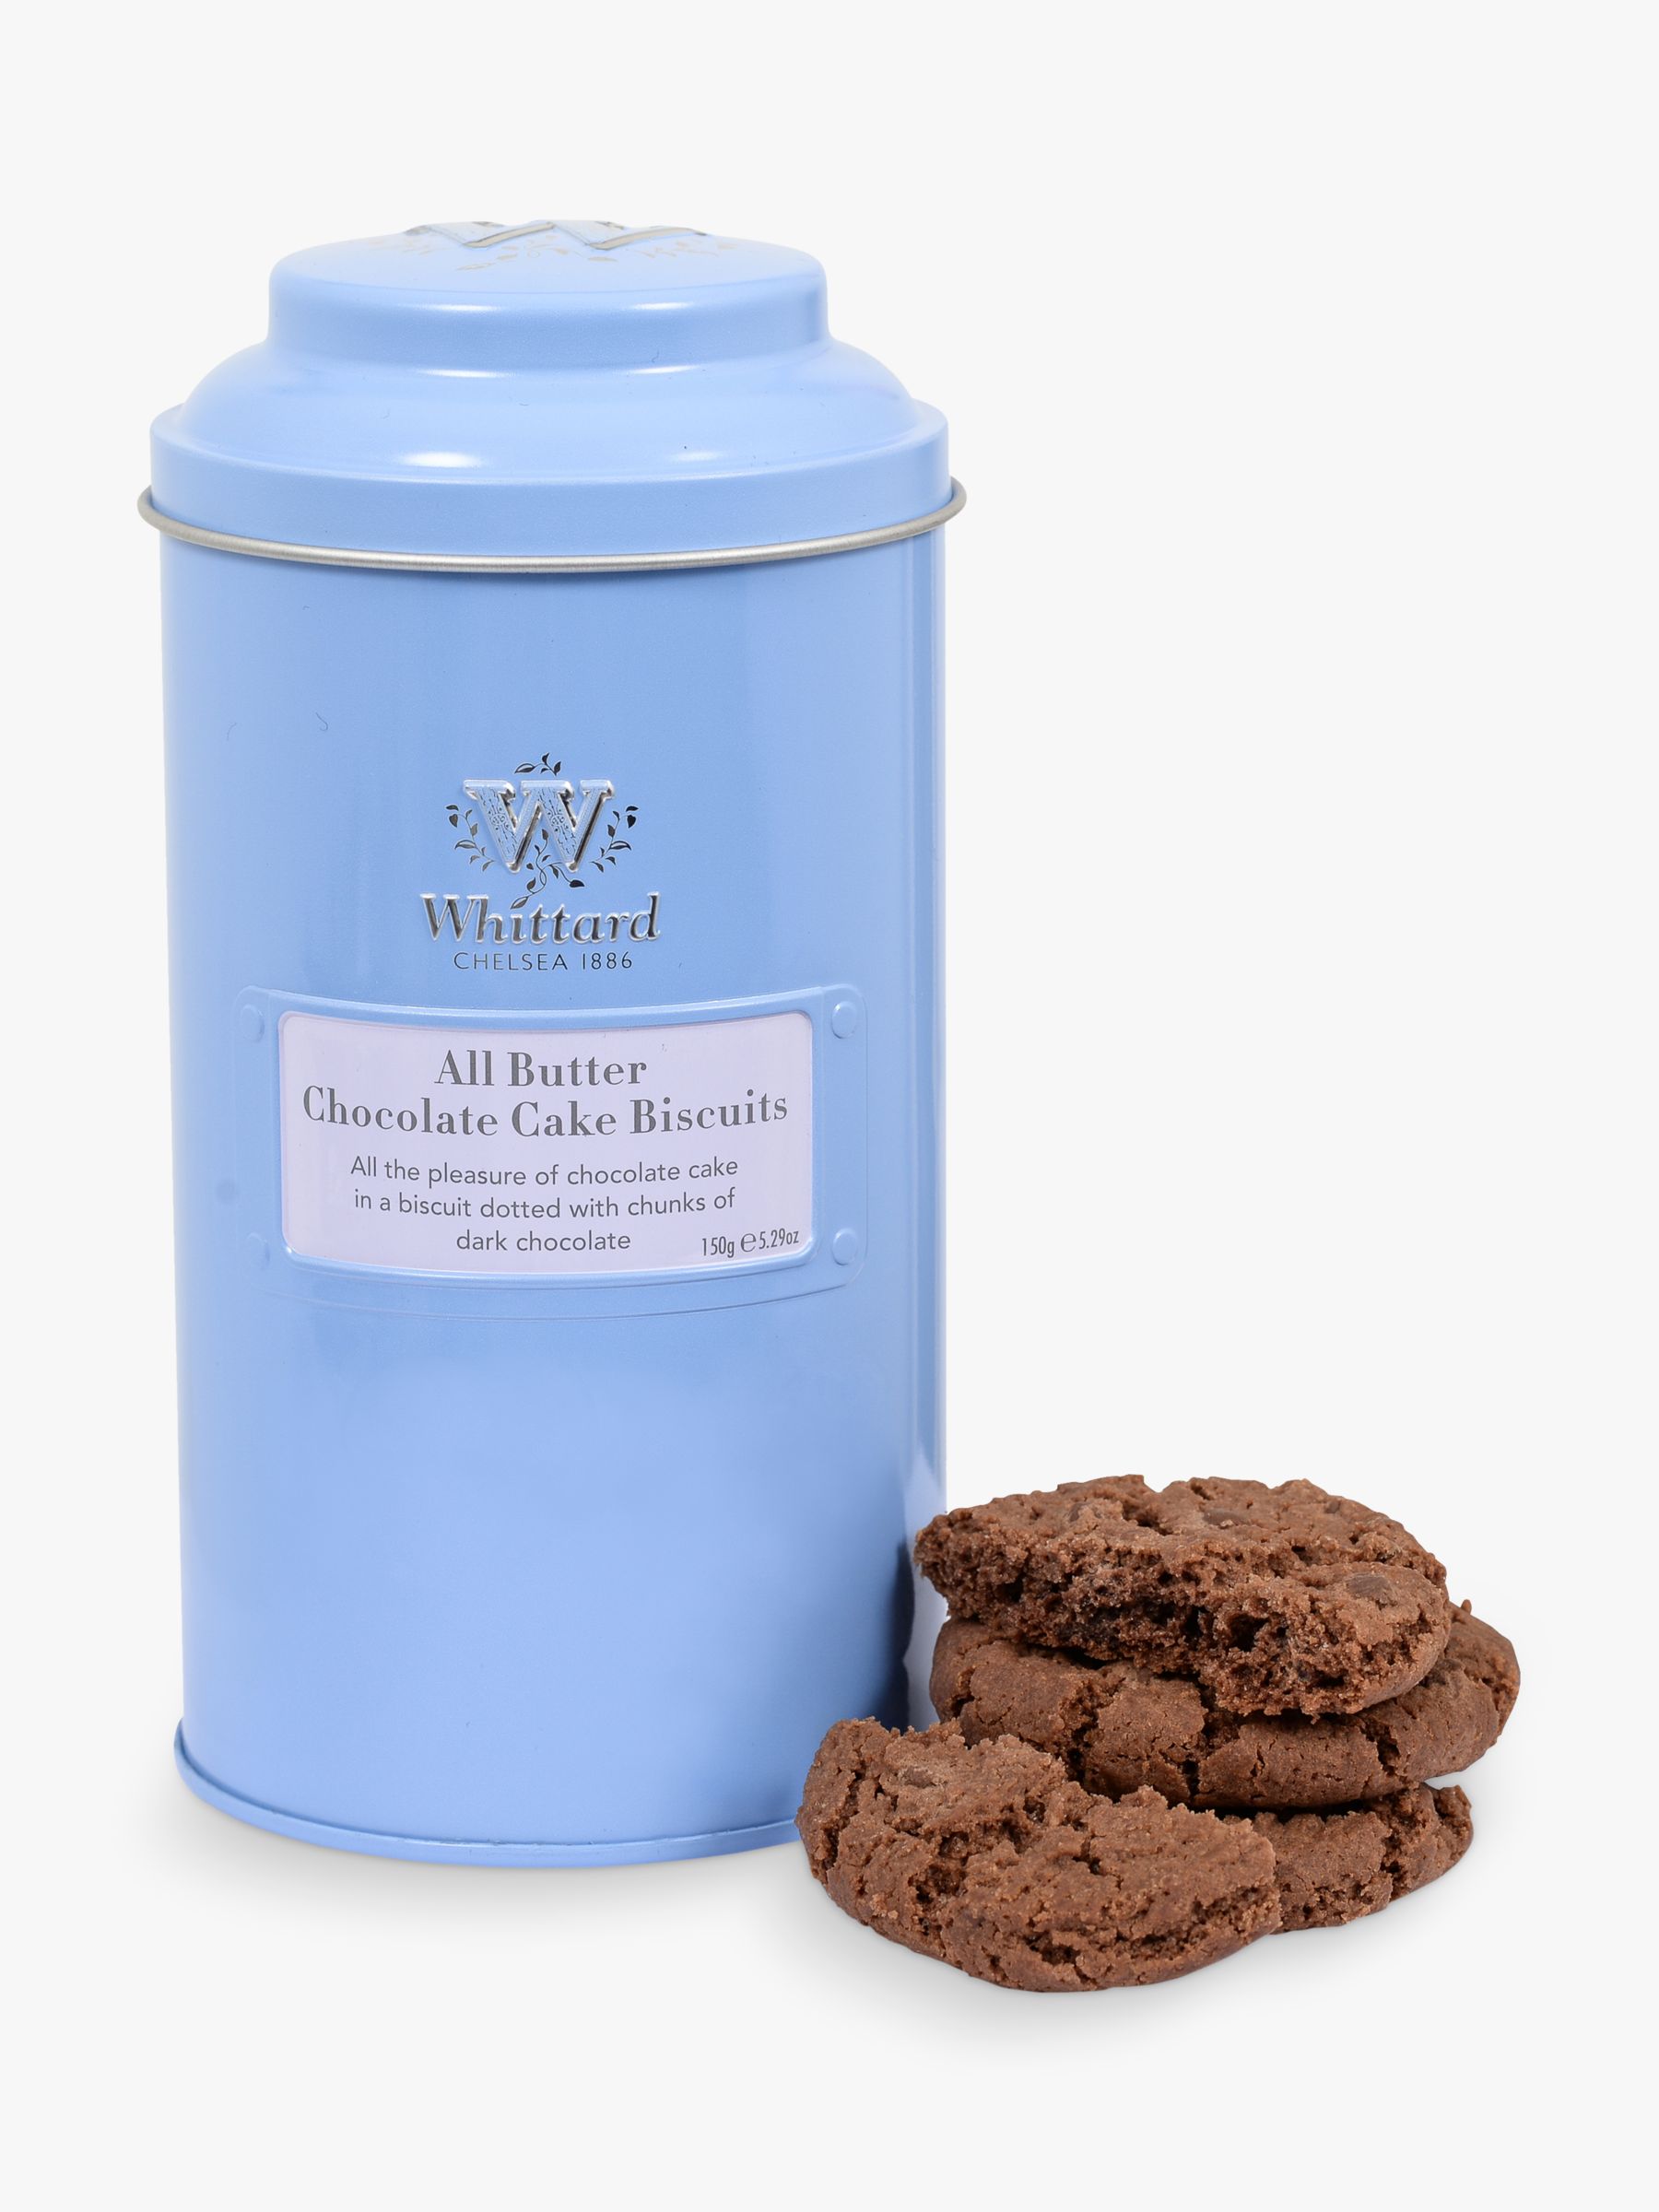 Whittard All Buter Chocolate Cake Biscuits, 150g